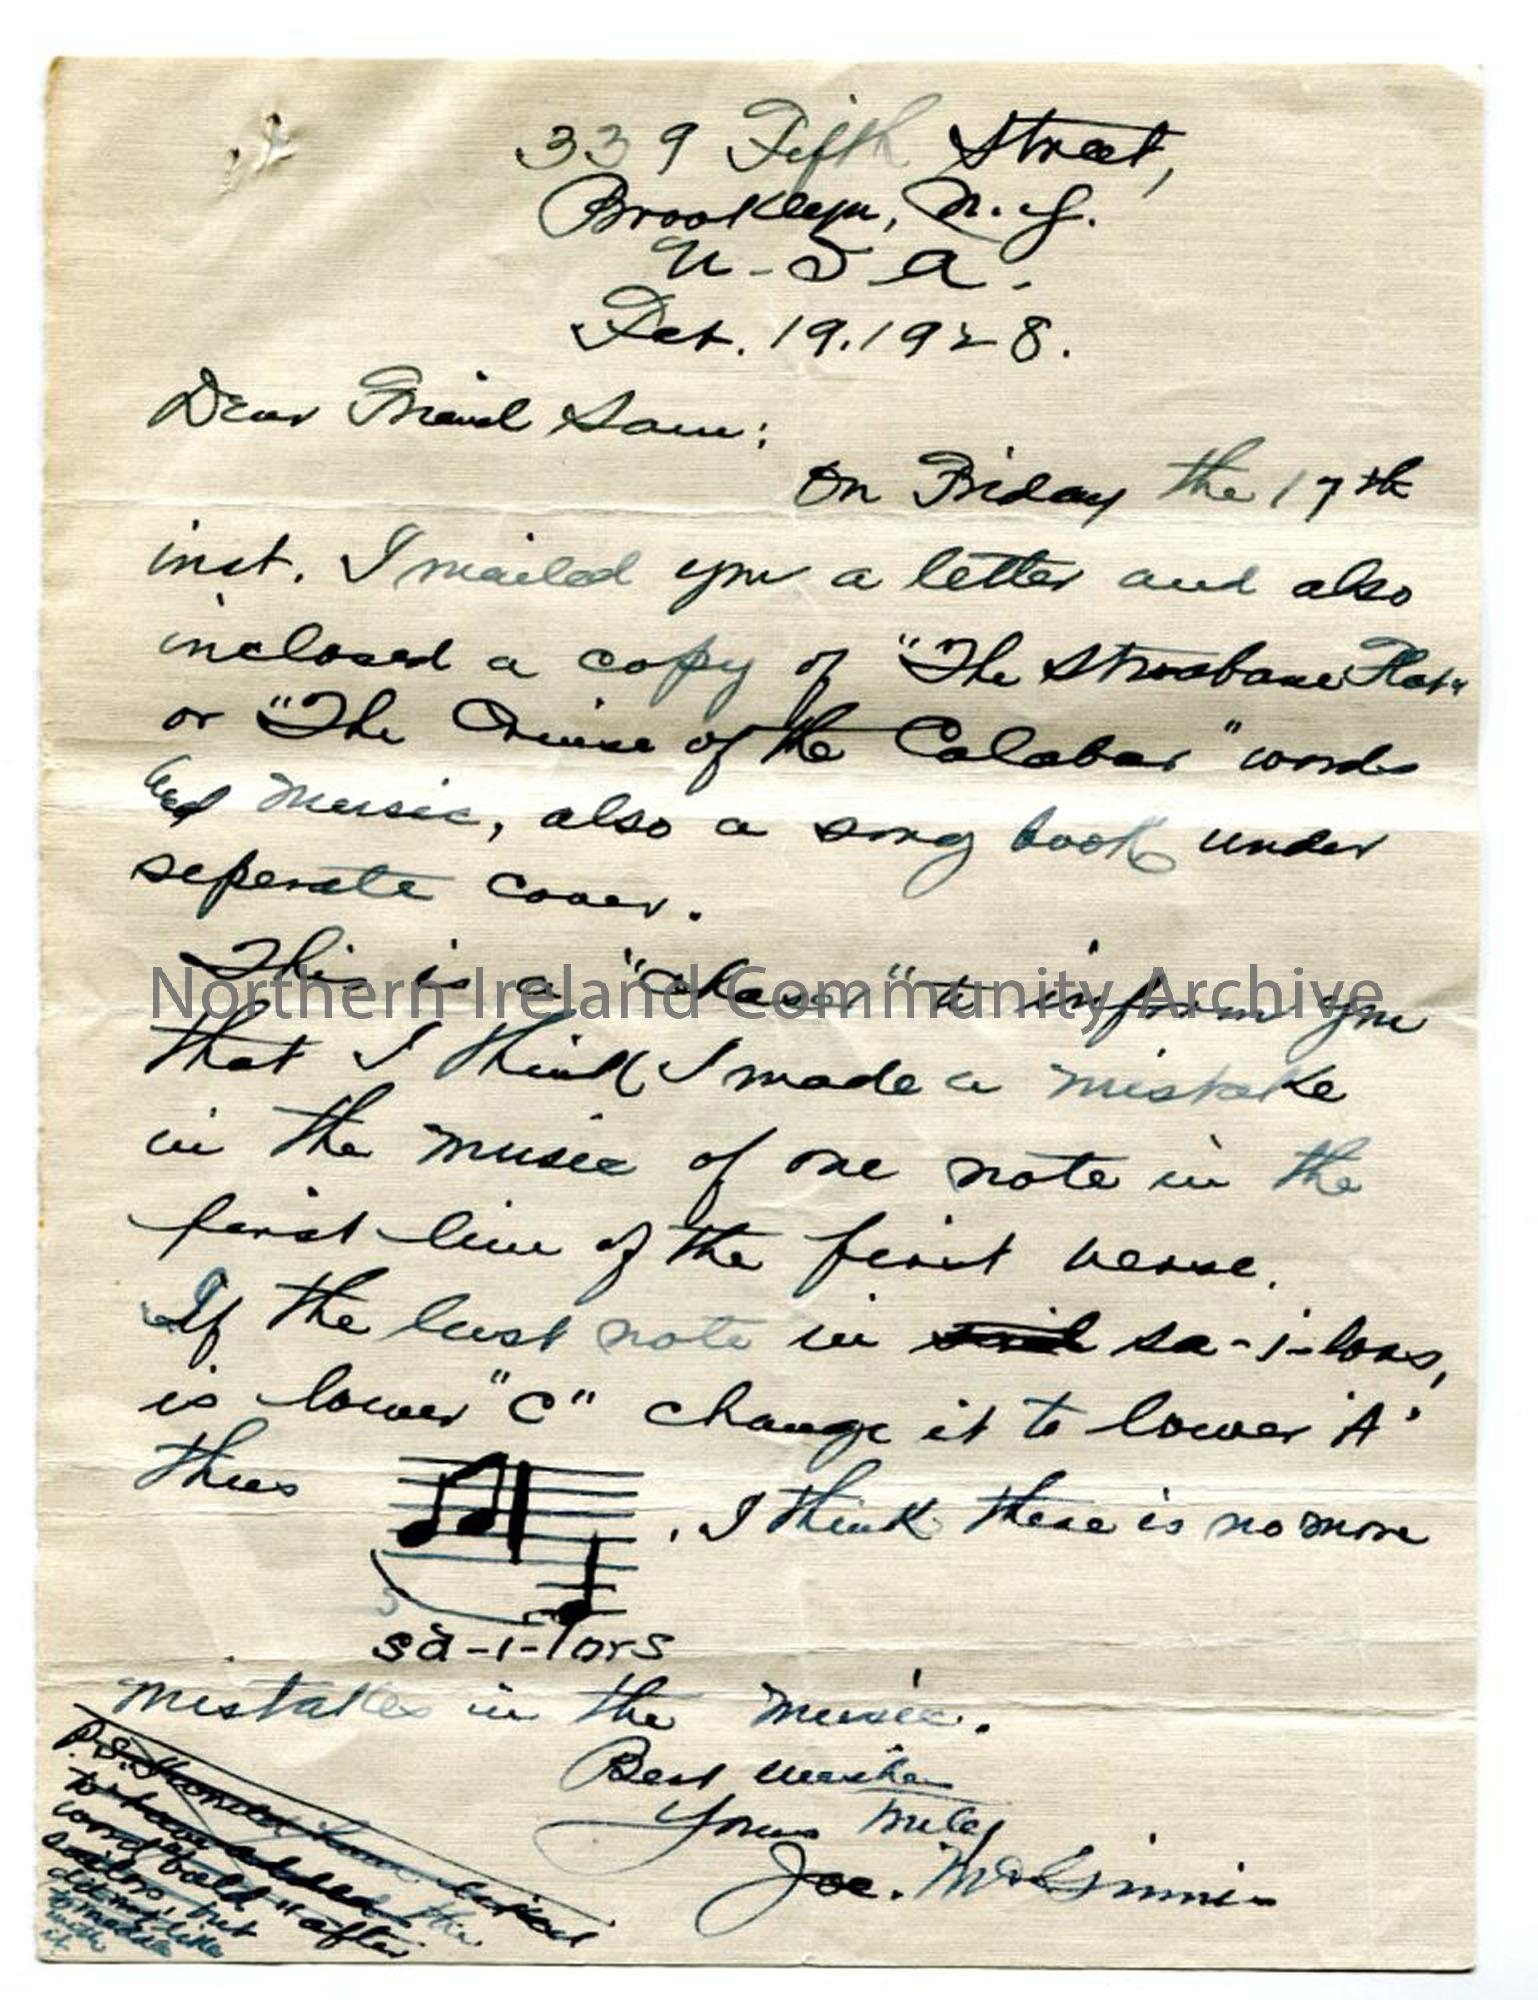 Letter from Joseph McGinnis, 19th February 1928